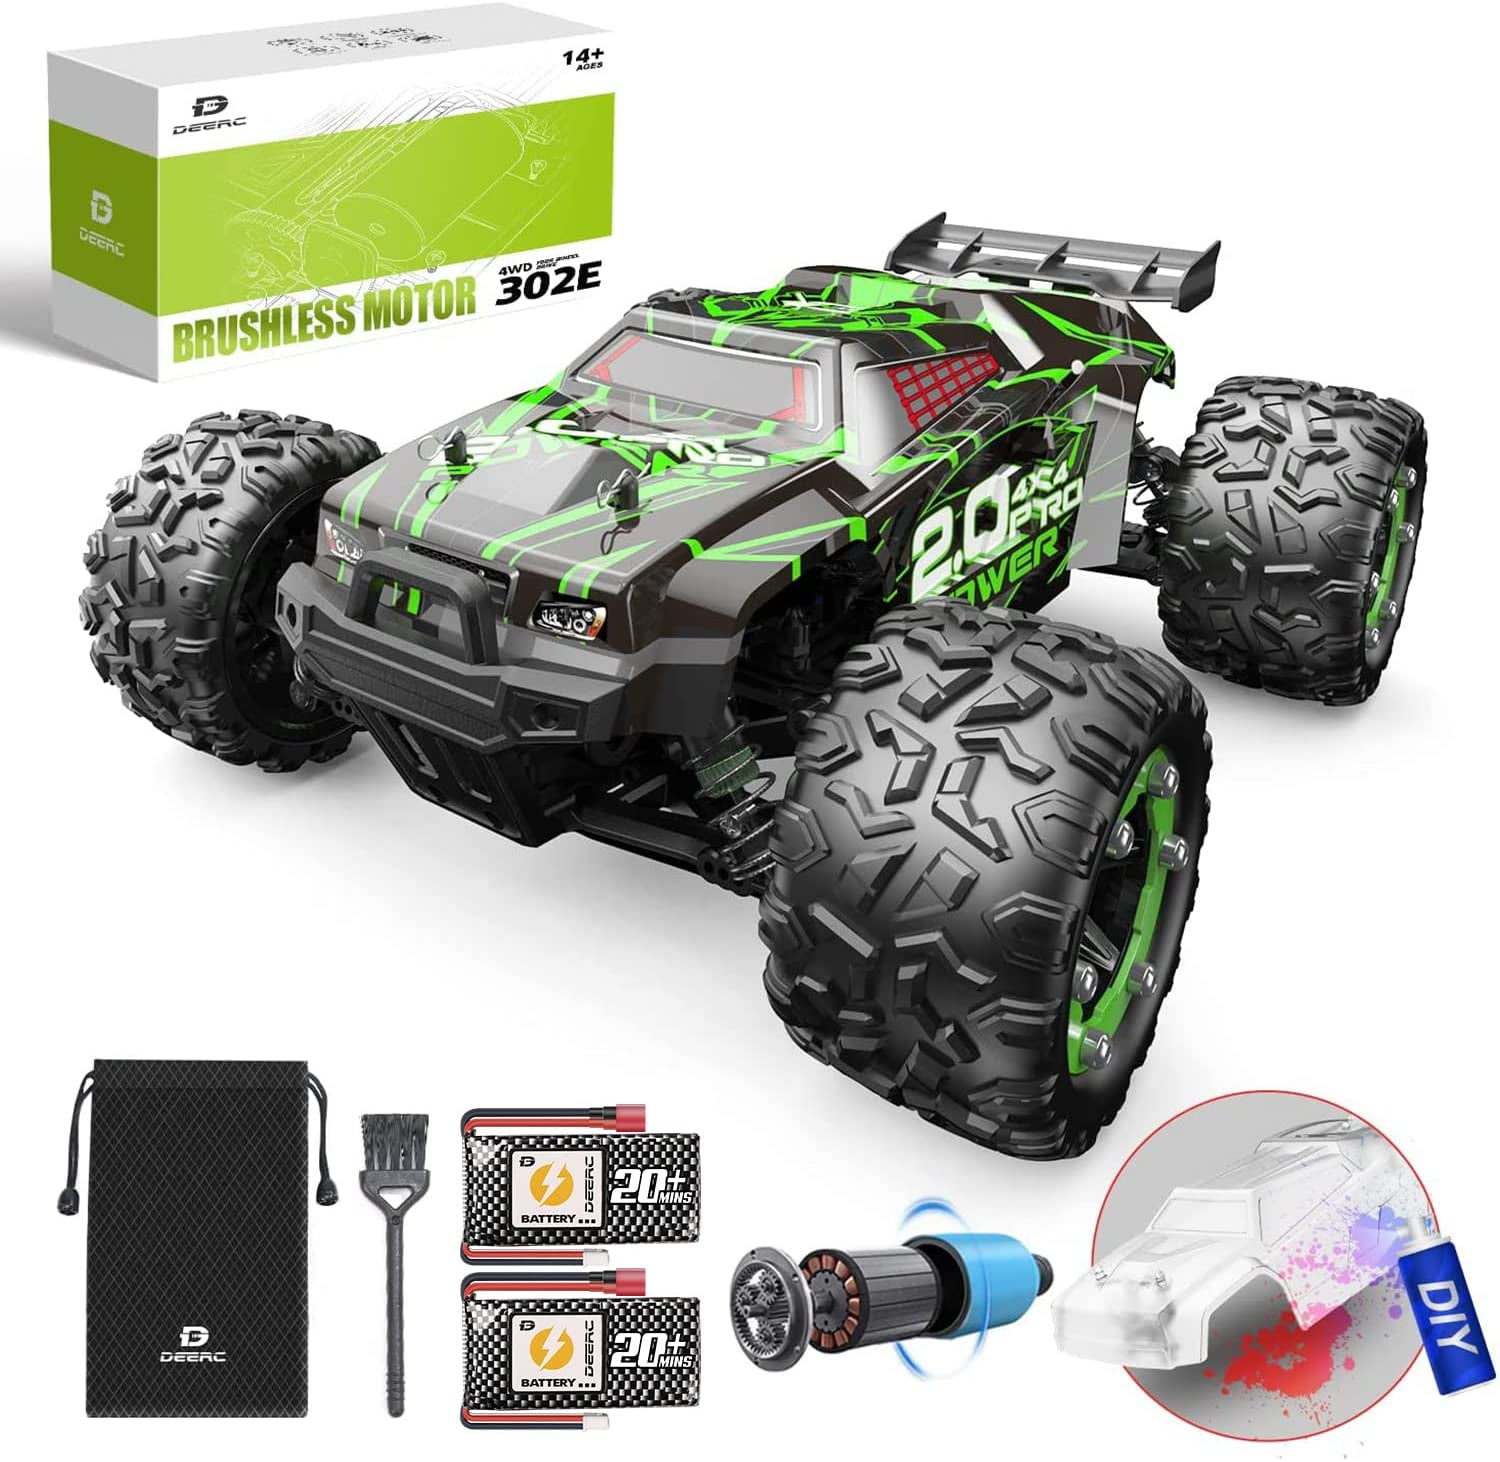 Waterproof Drift Off-Road High Speed Remote Control Car with Two Rechargeable Batteries TizzyToy Remote Control Car 1:18 Scale 45Km/h 4WD RC Car Toy Gift for Boys Girls Hobbyist Grade for Adults 